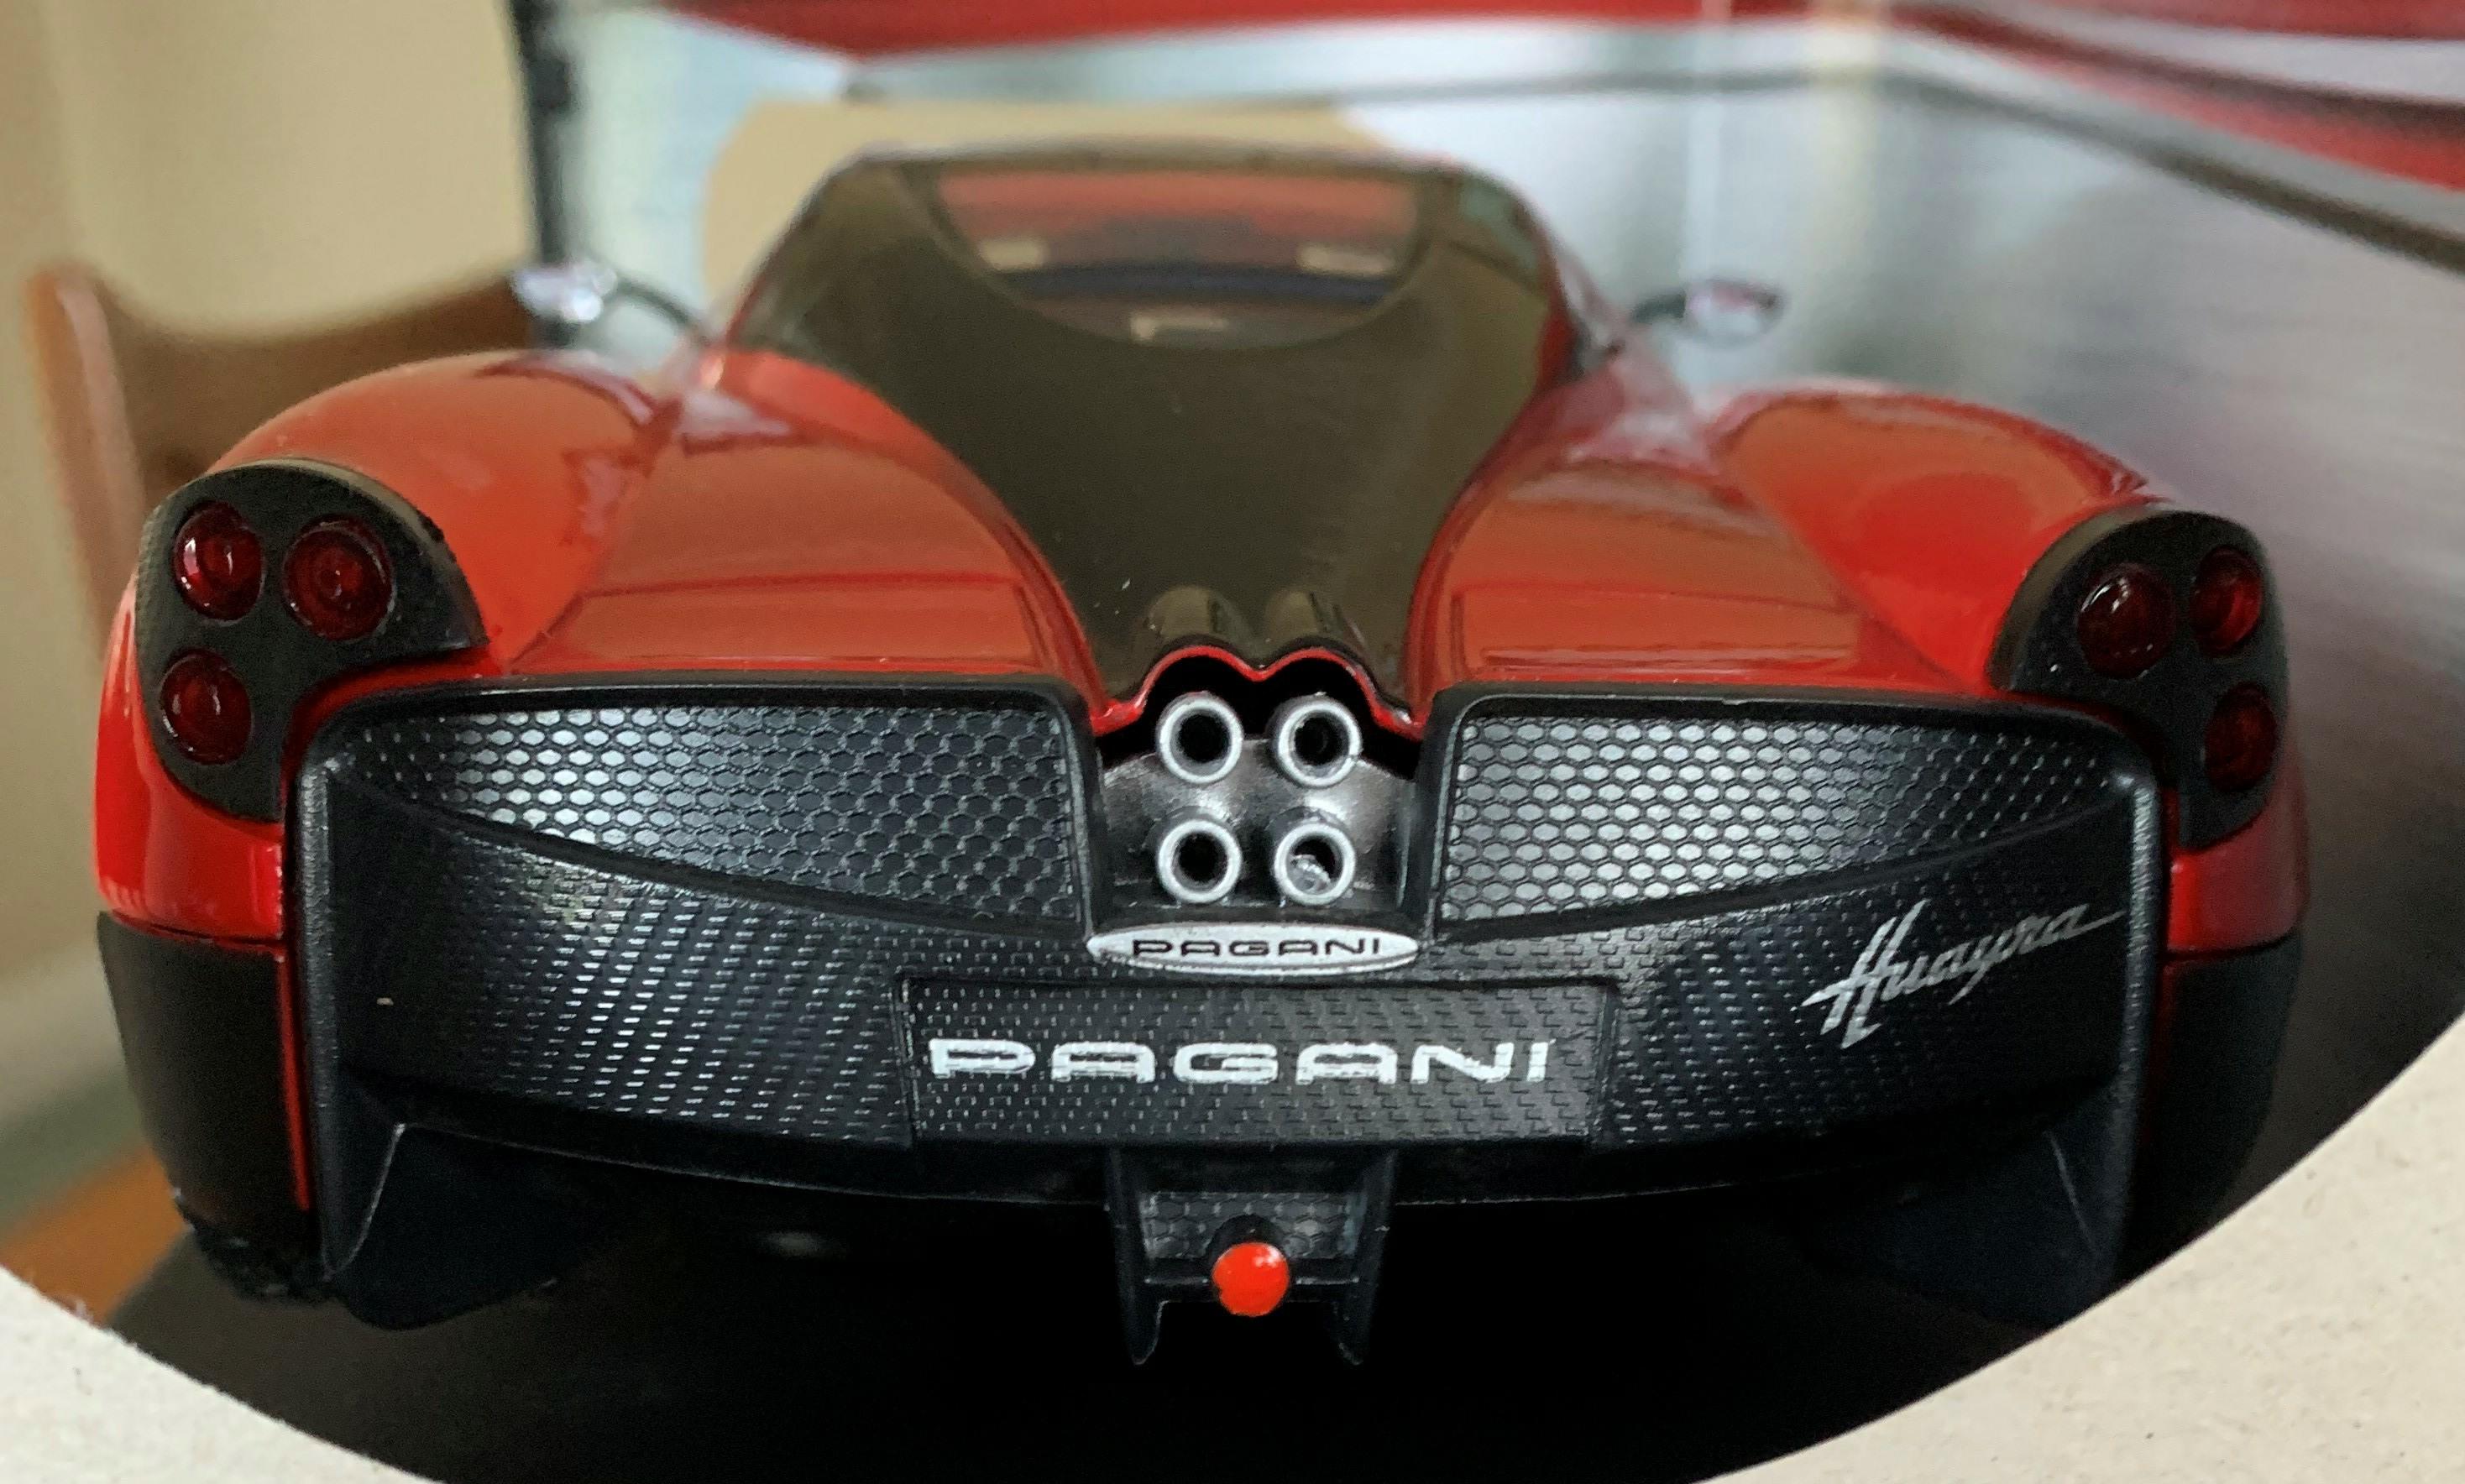 Pagani Huayra 2012 in red 1:24 scale model from Motormax